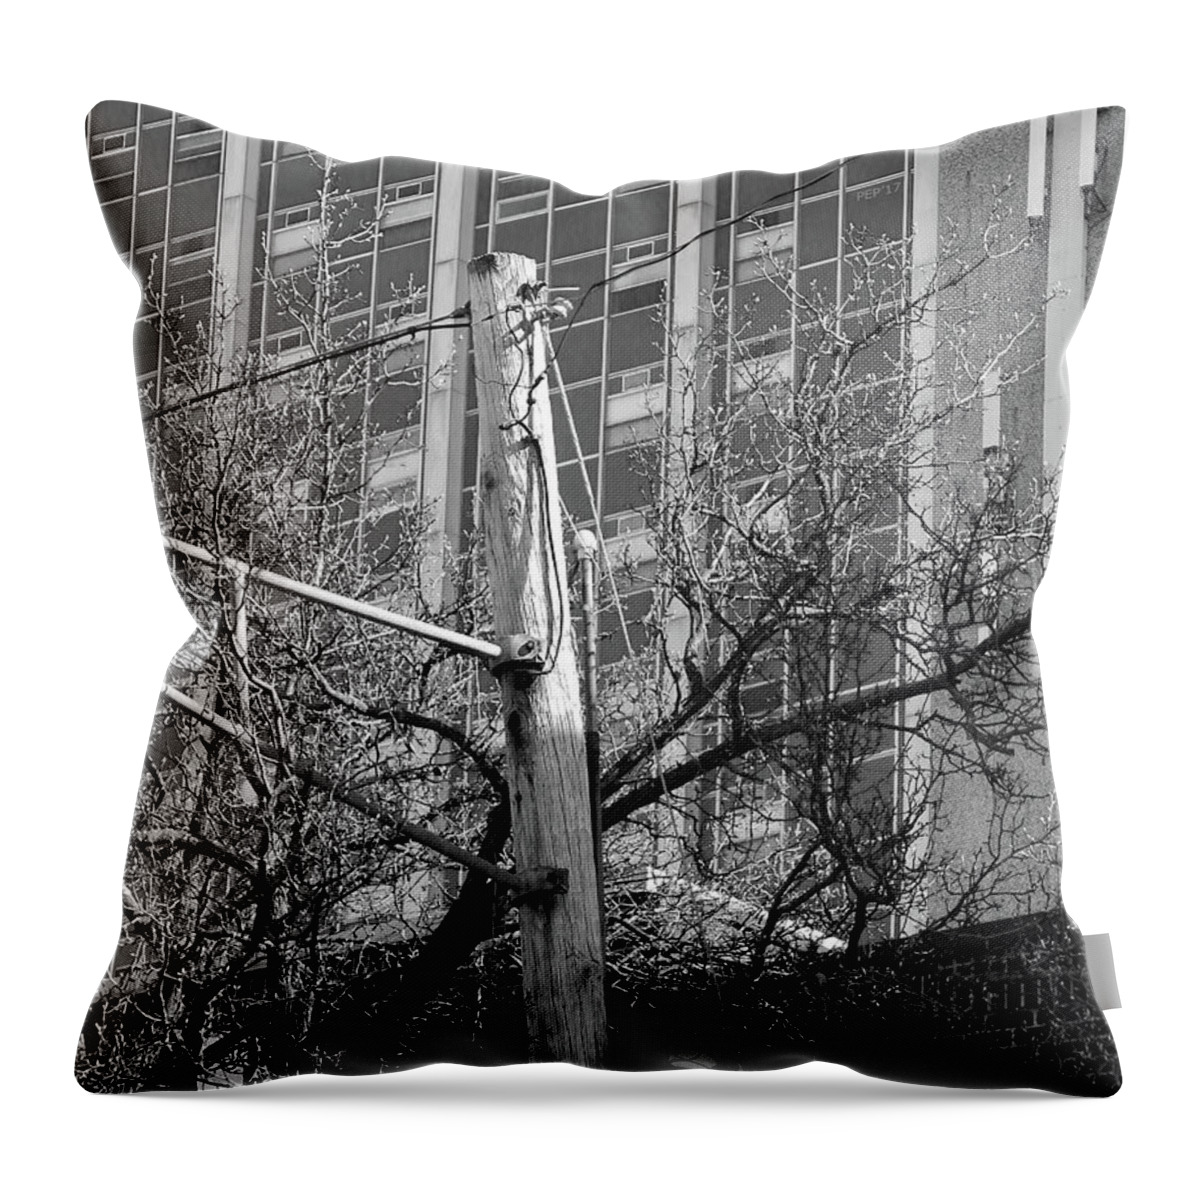 Telephone Pole Throw Pillow featuring the digital art Old Telephone Pole by Phil Perkins